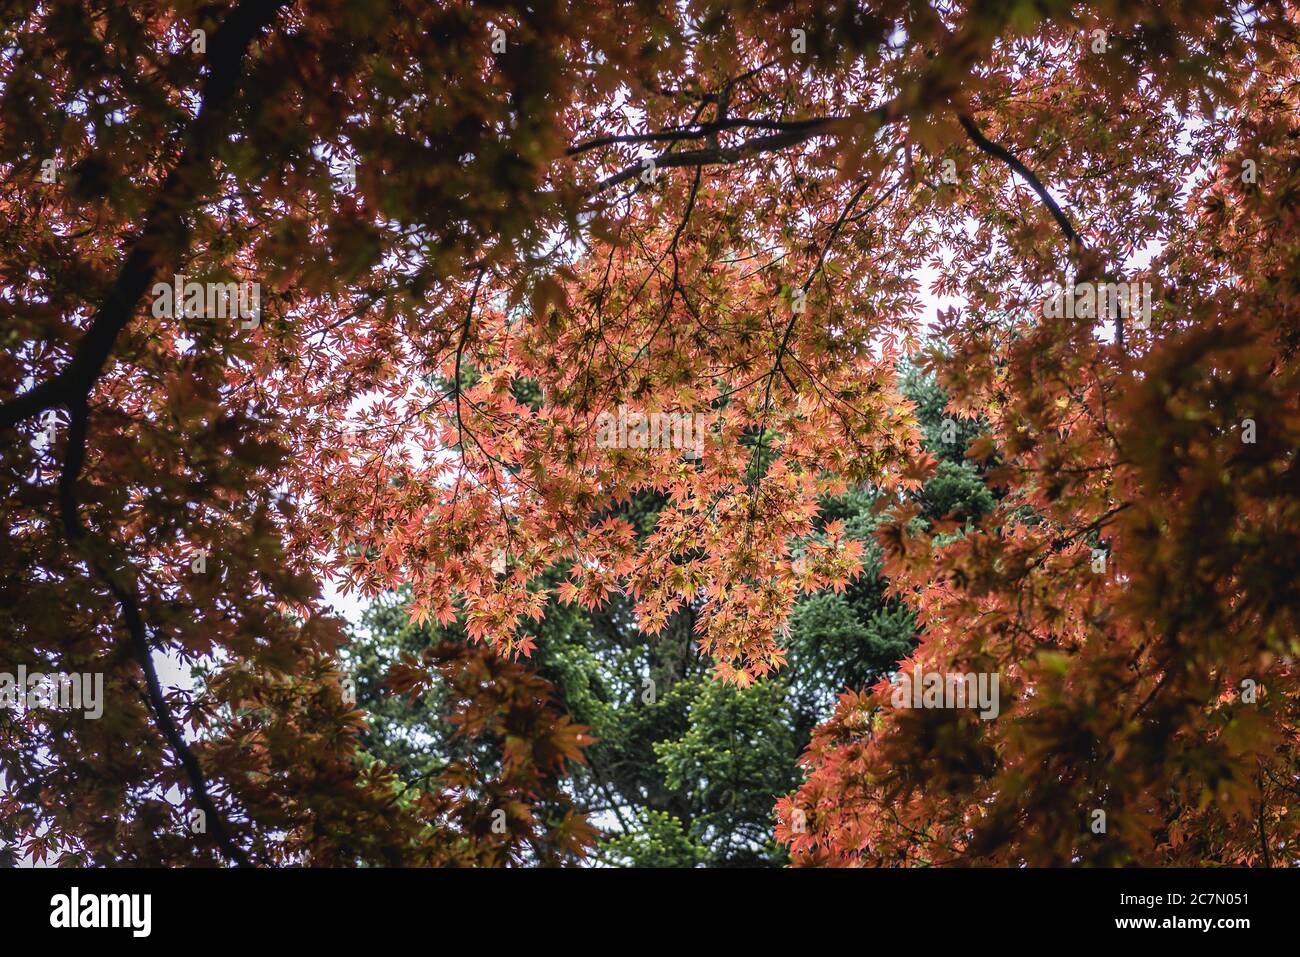 Acer palmatum tree, variety with red leaves, common name Japanese Maple, Palmate Maple or Smooth Japanese Maple Stock Photo